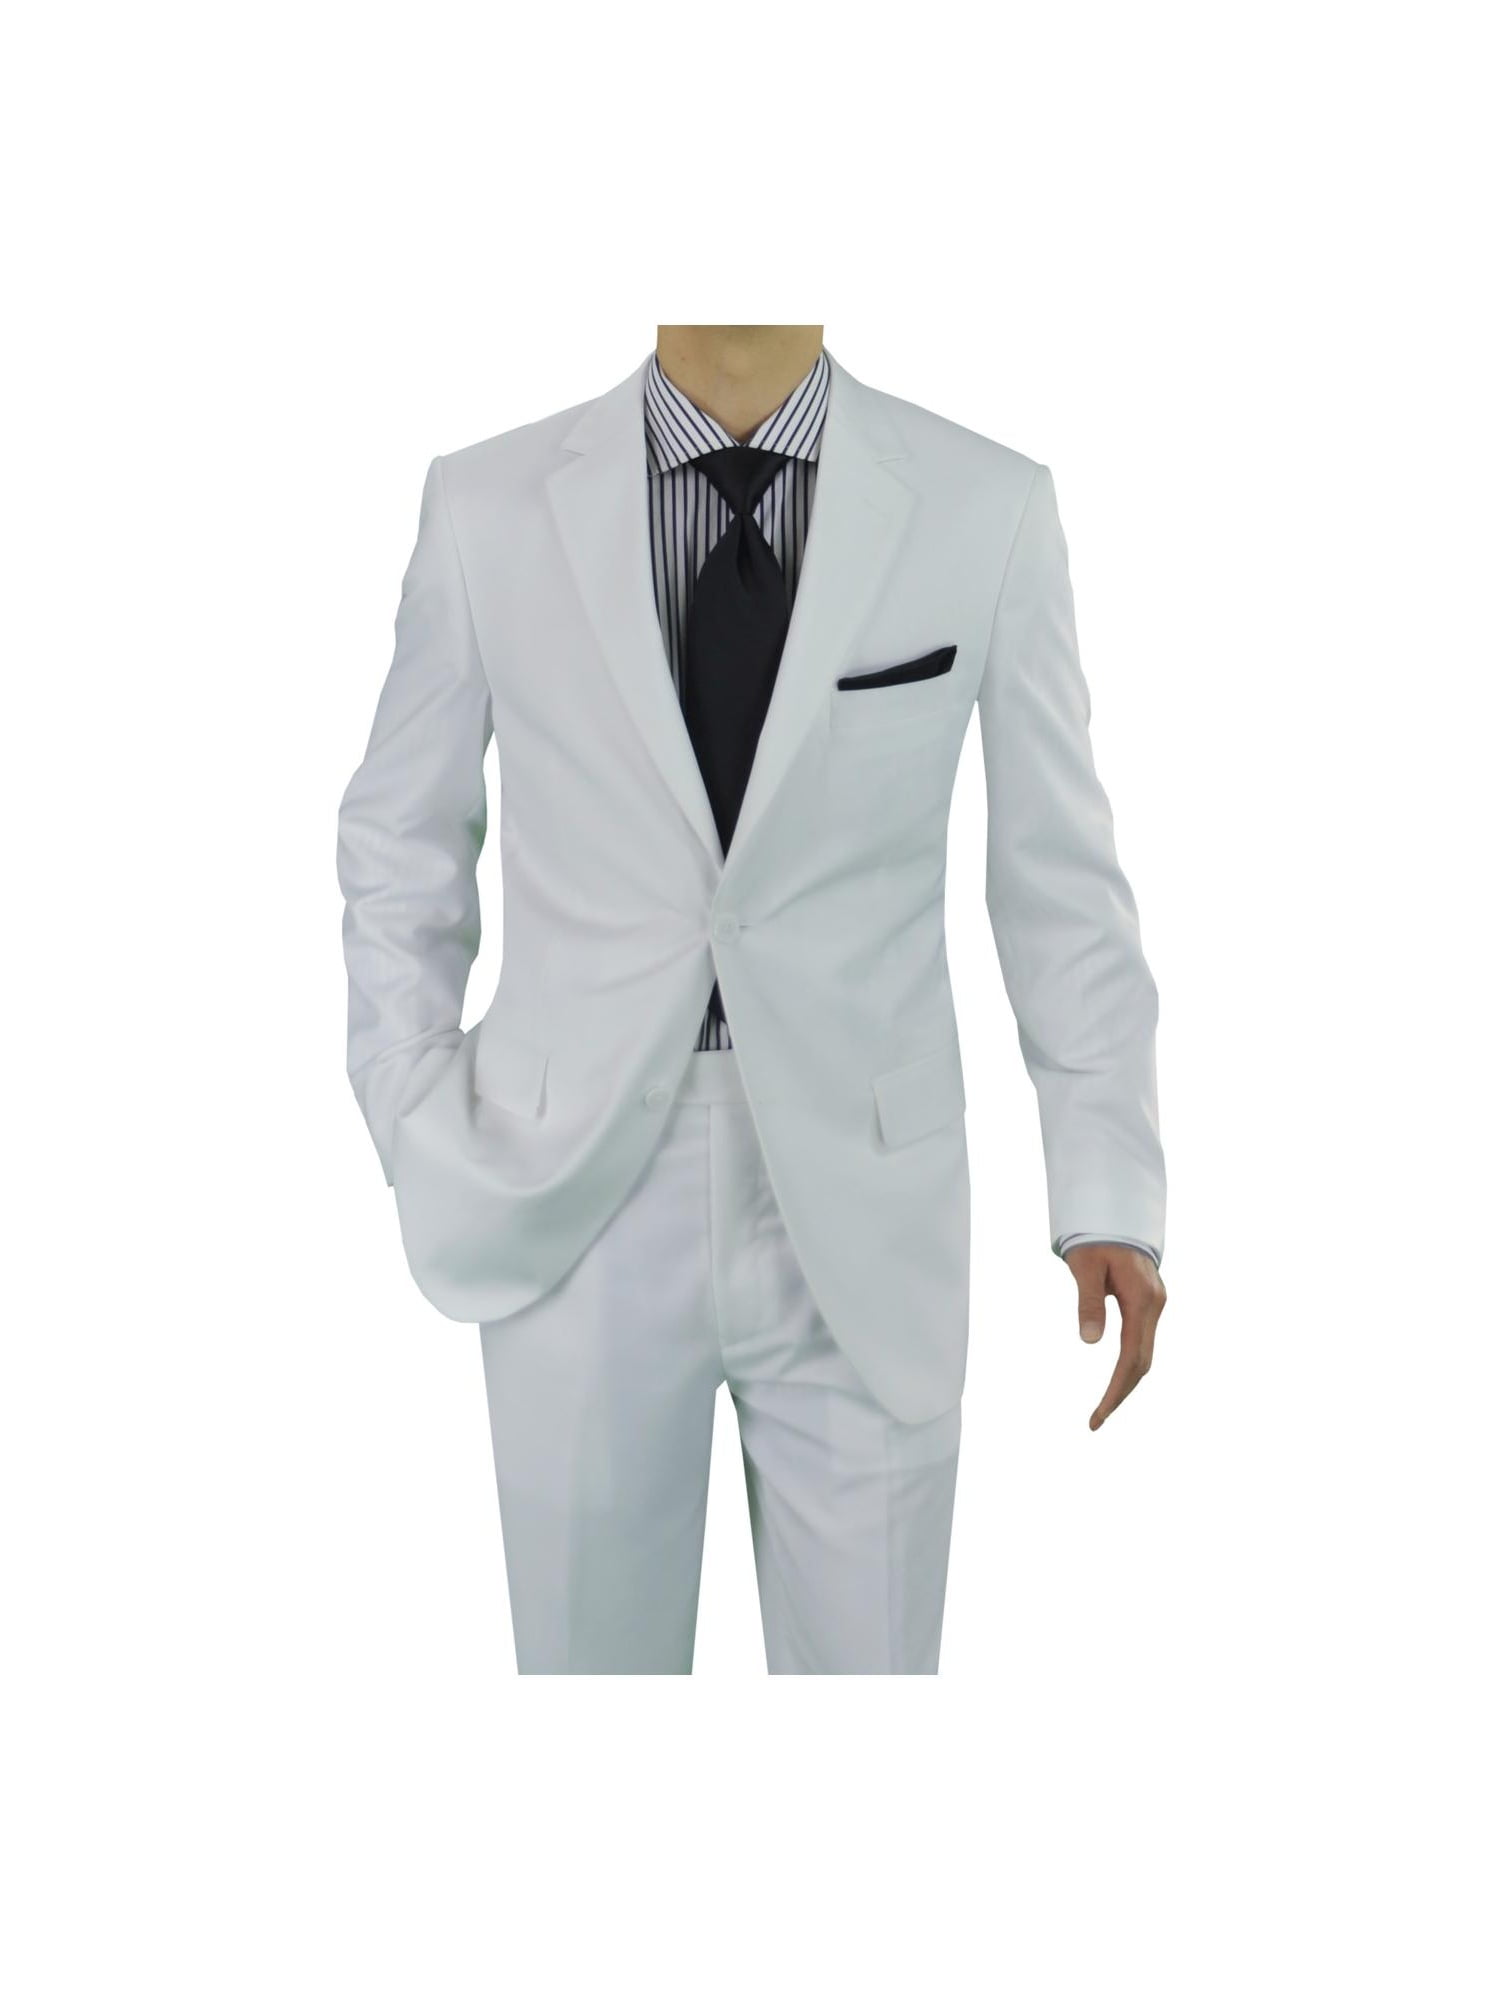 GN GIORGIO NAPOLI Presidential Mens Two Button Suit 2 Piece Modern Fit Tux Set